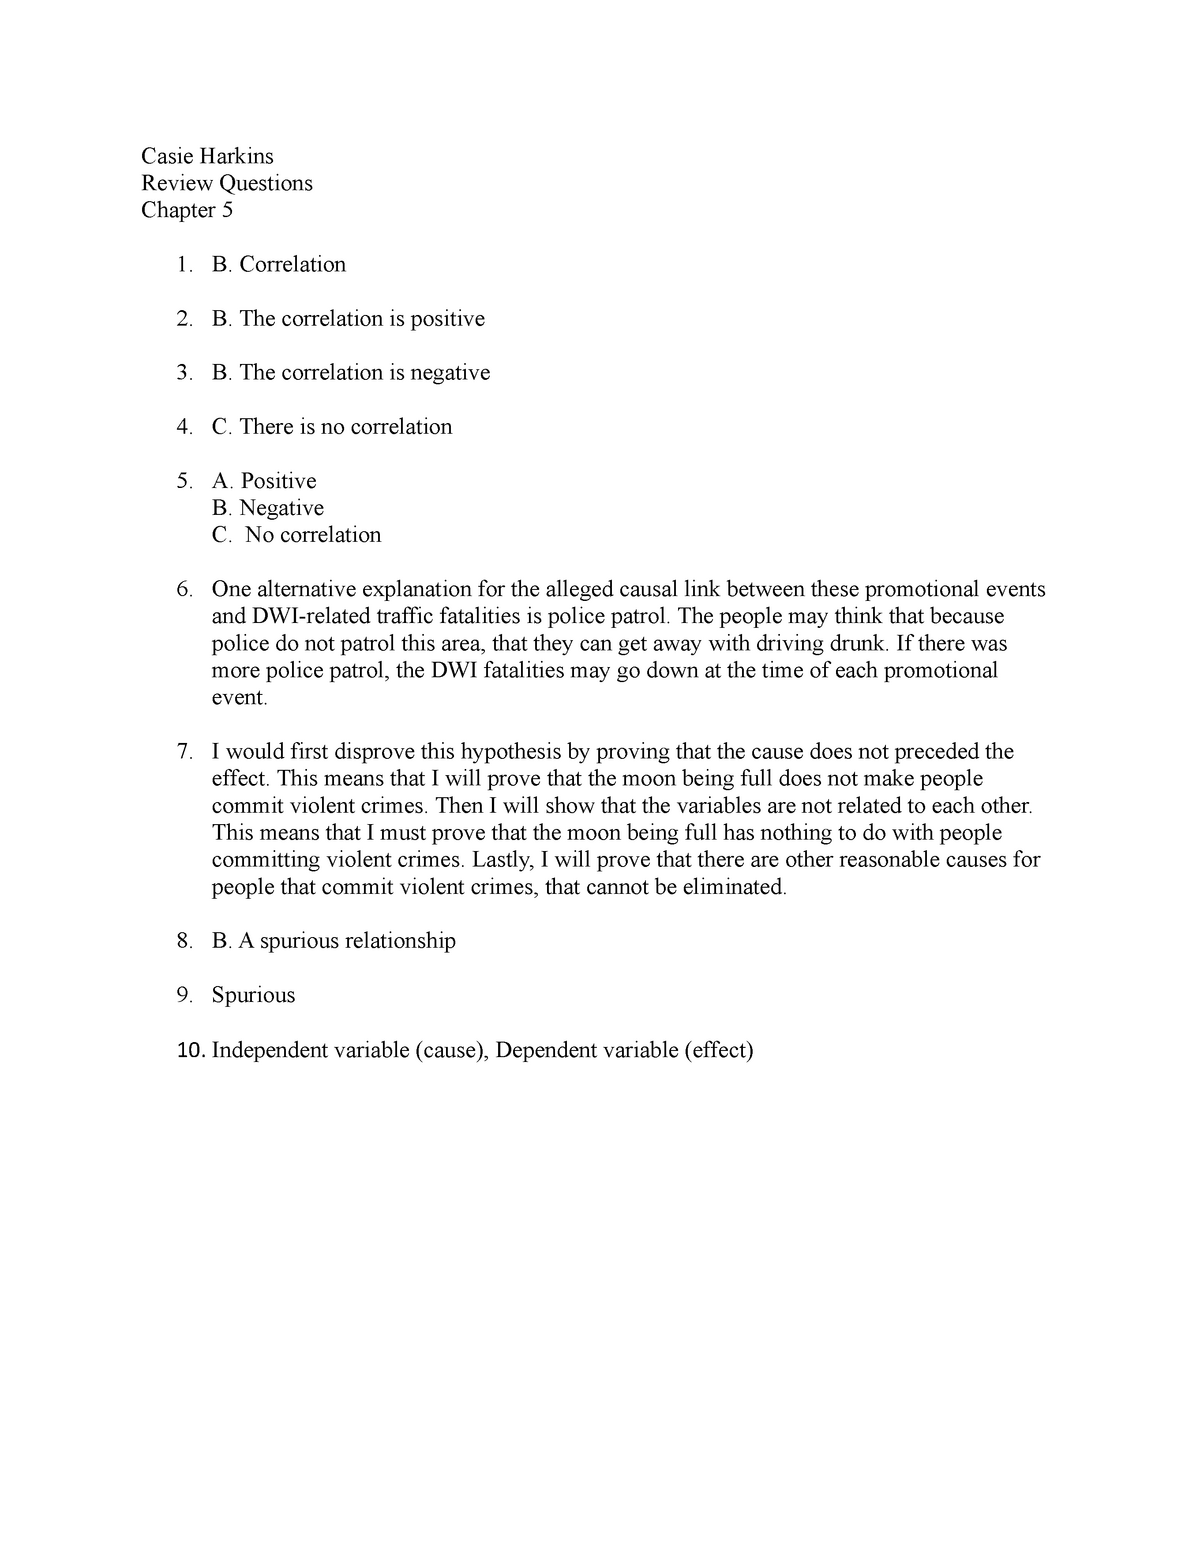 research methods chapter 5 quizlet